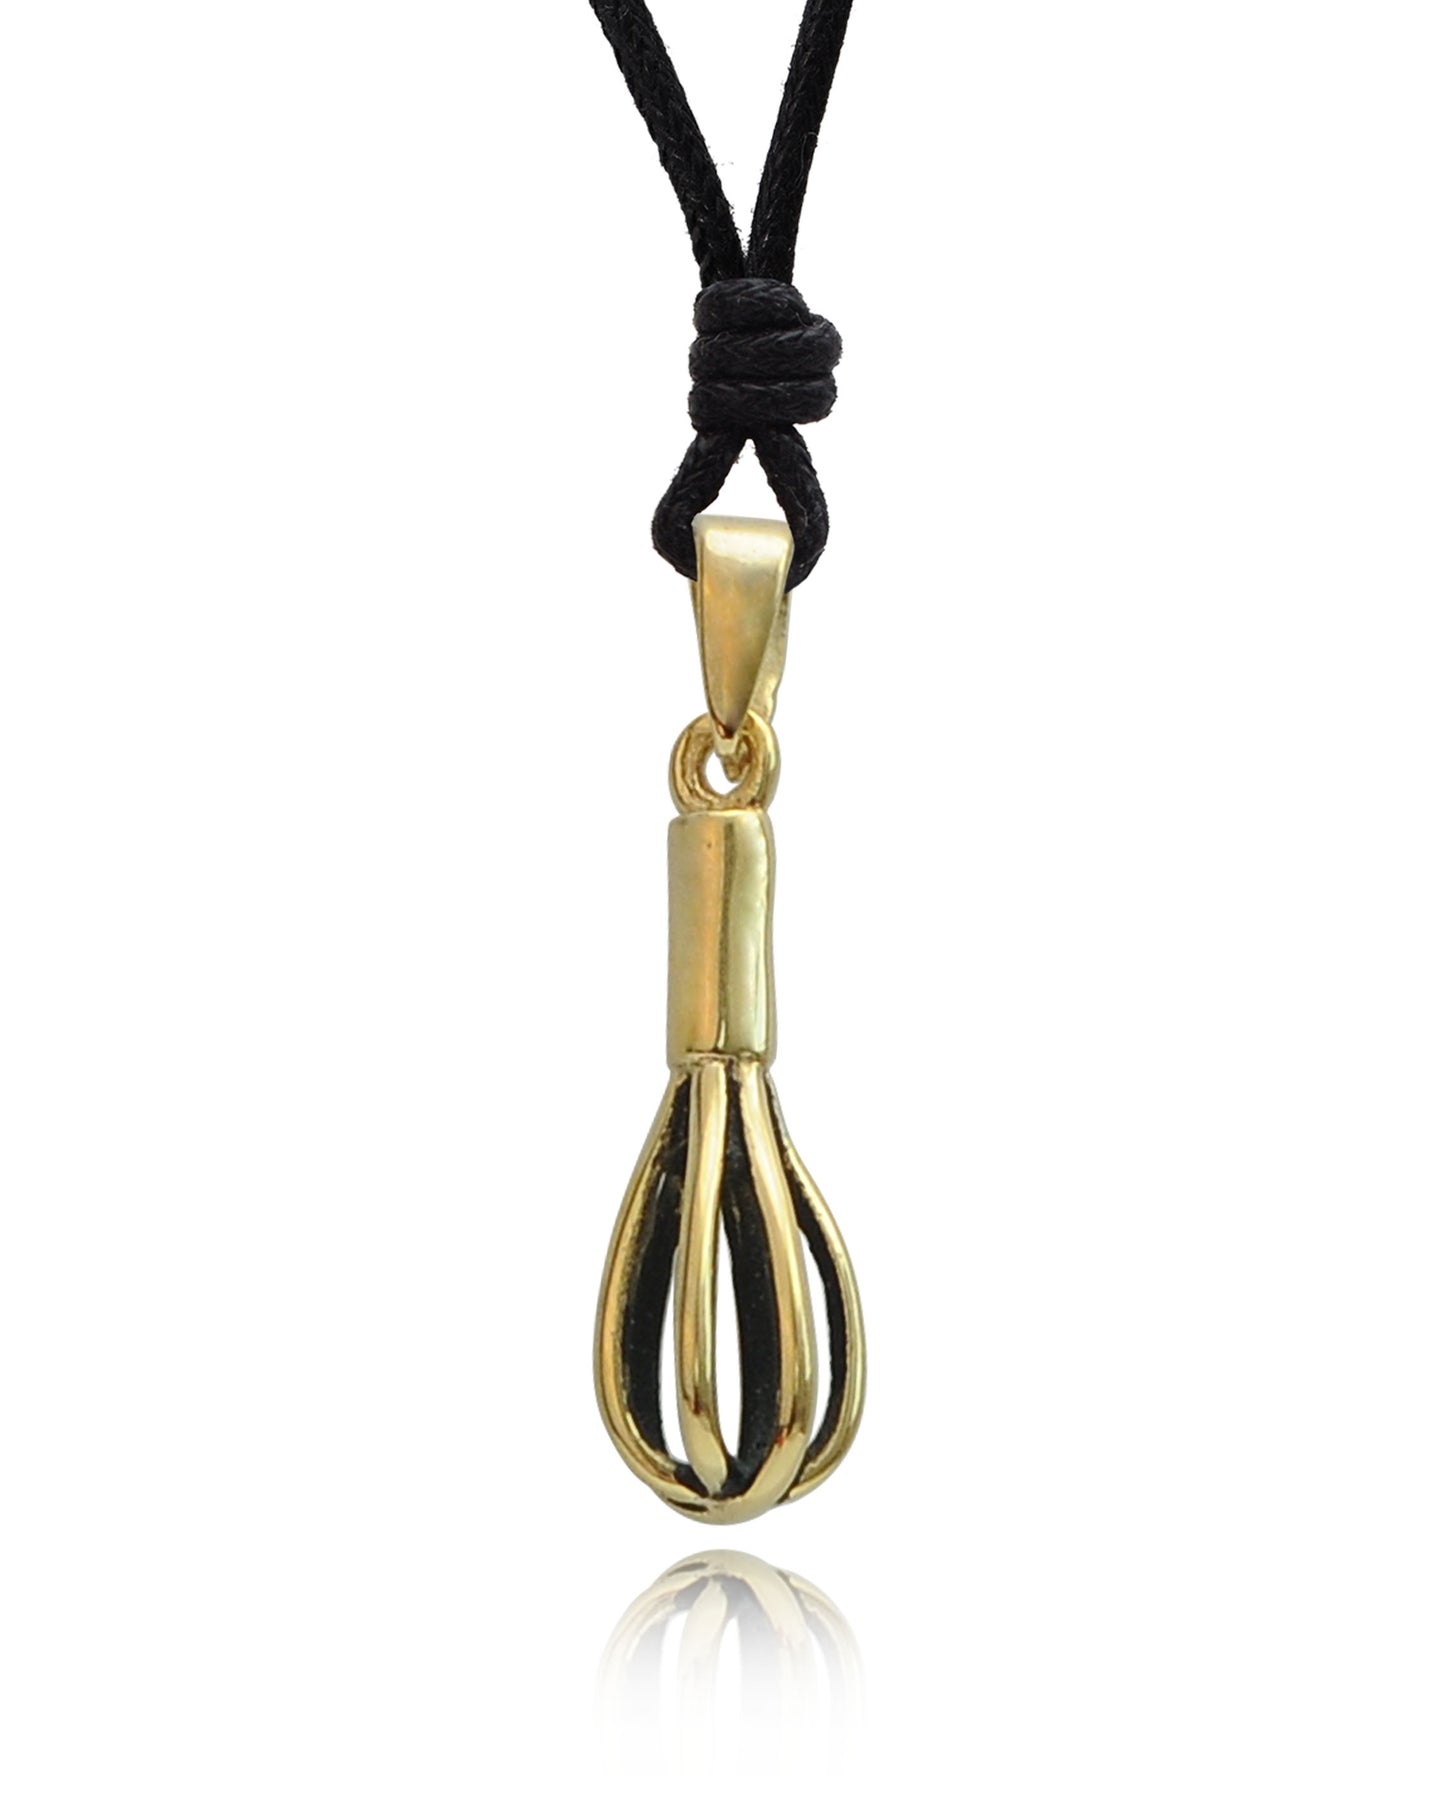 Cute Egg-beater  Brass Charm Necklace Pendant Jewelry With Cotton Cord